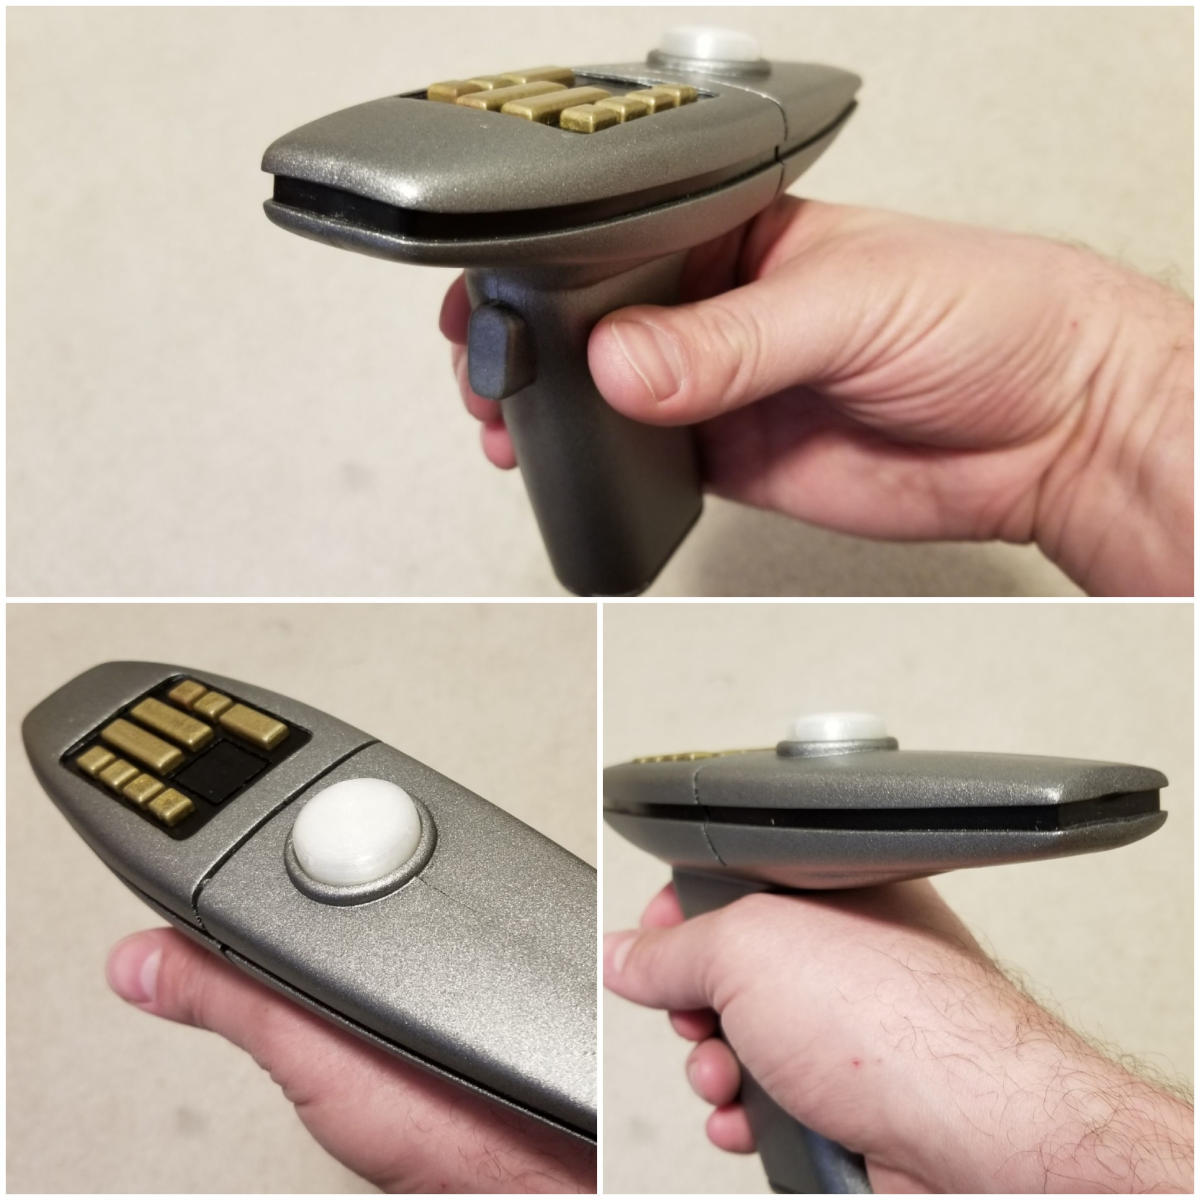 July 1, 2019: Final version of the phaser